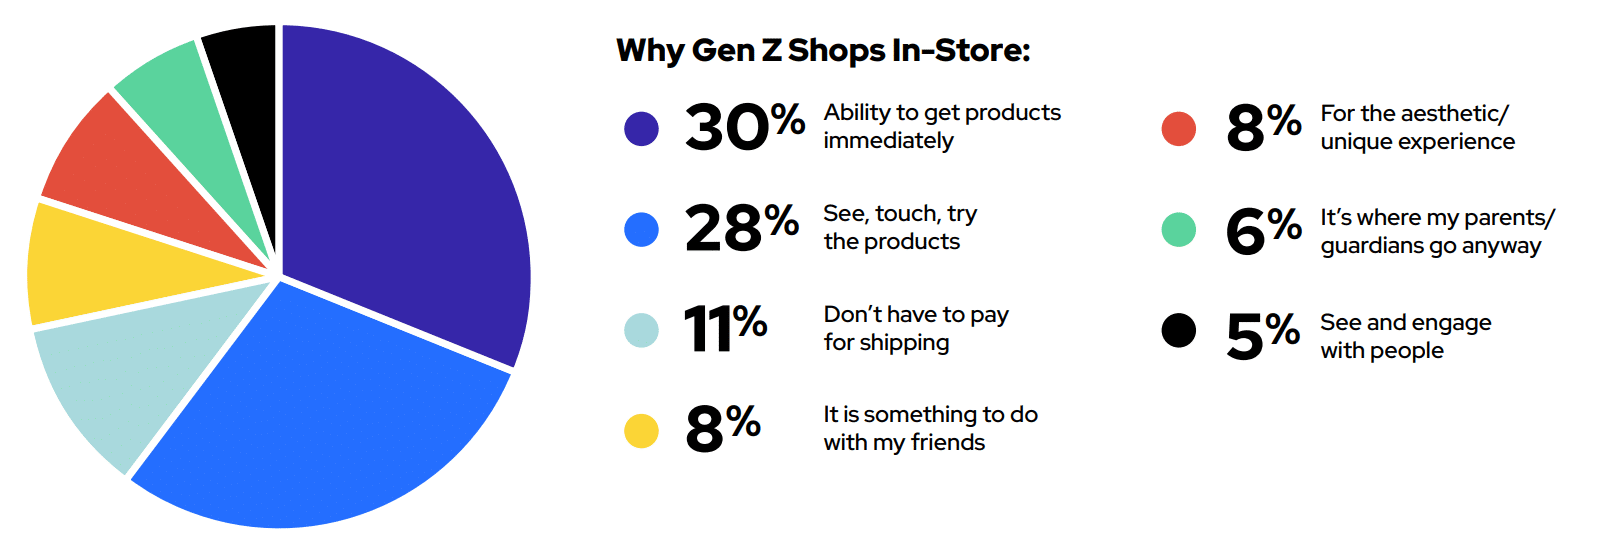 Rise of the Gen Z consumer: They are career-driven, credit-averse, supportive of cause-driven brands—and tempted by immersive retail